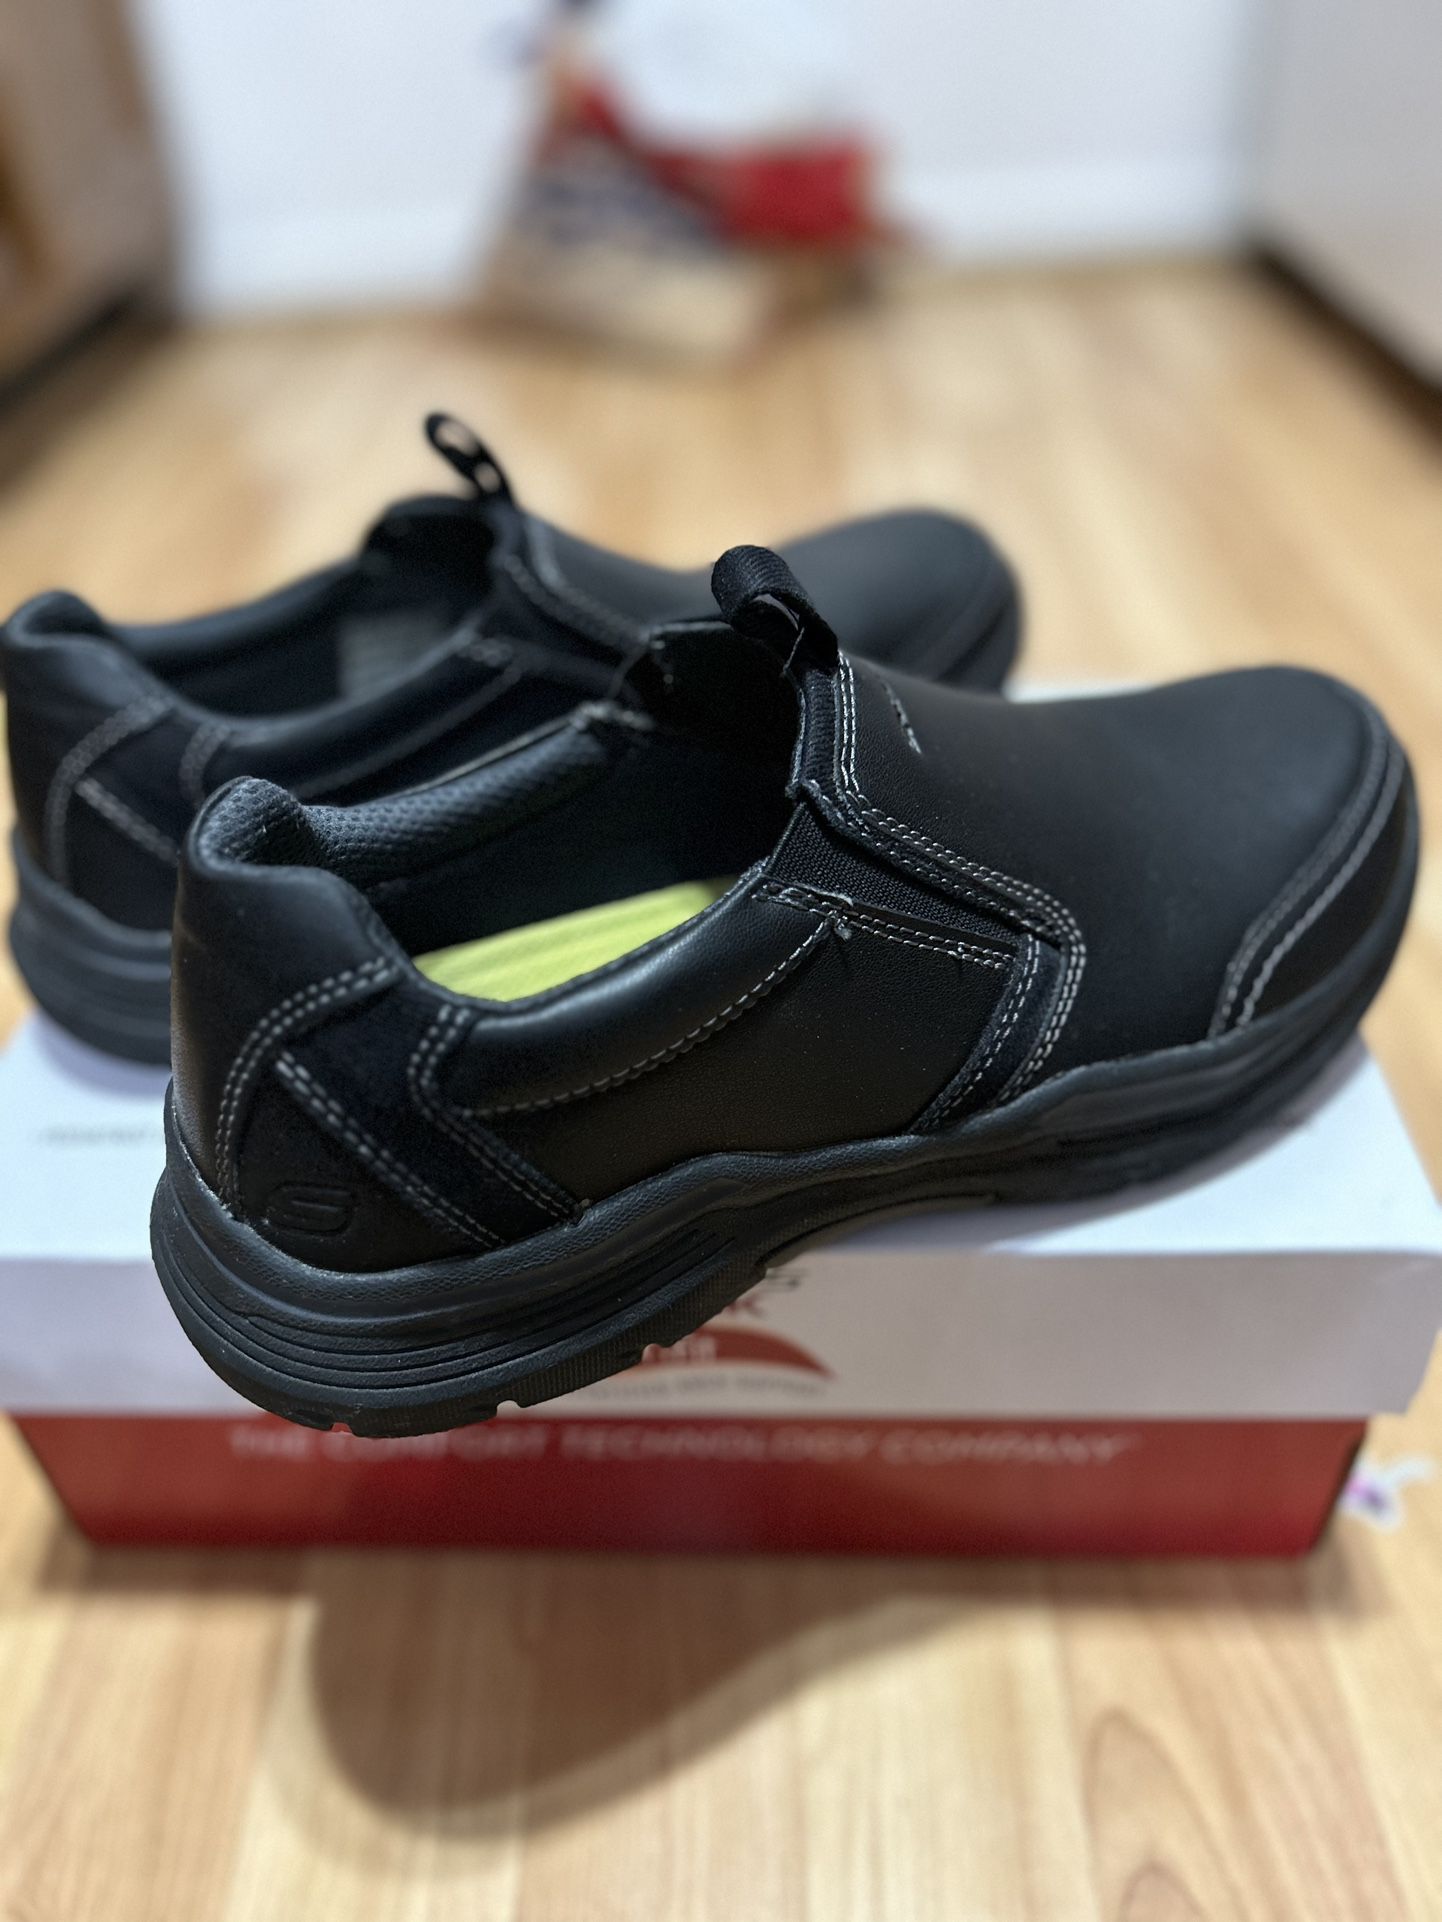 Skechers relaxed fit leather with gogamat arch 9.5US shoes for in Clinton Township, MI - OfferUp